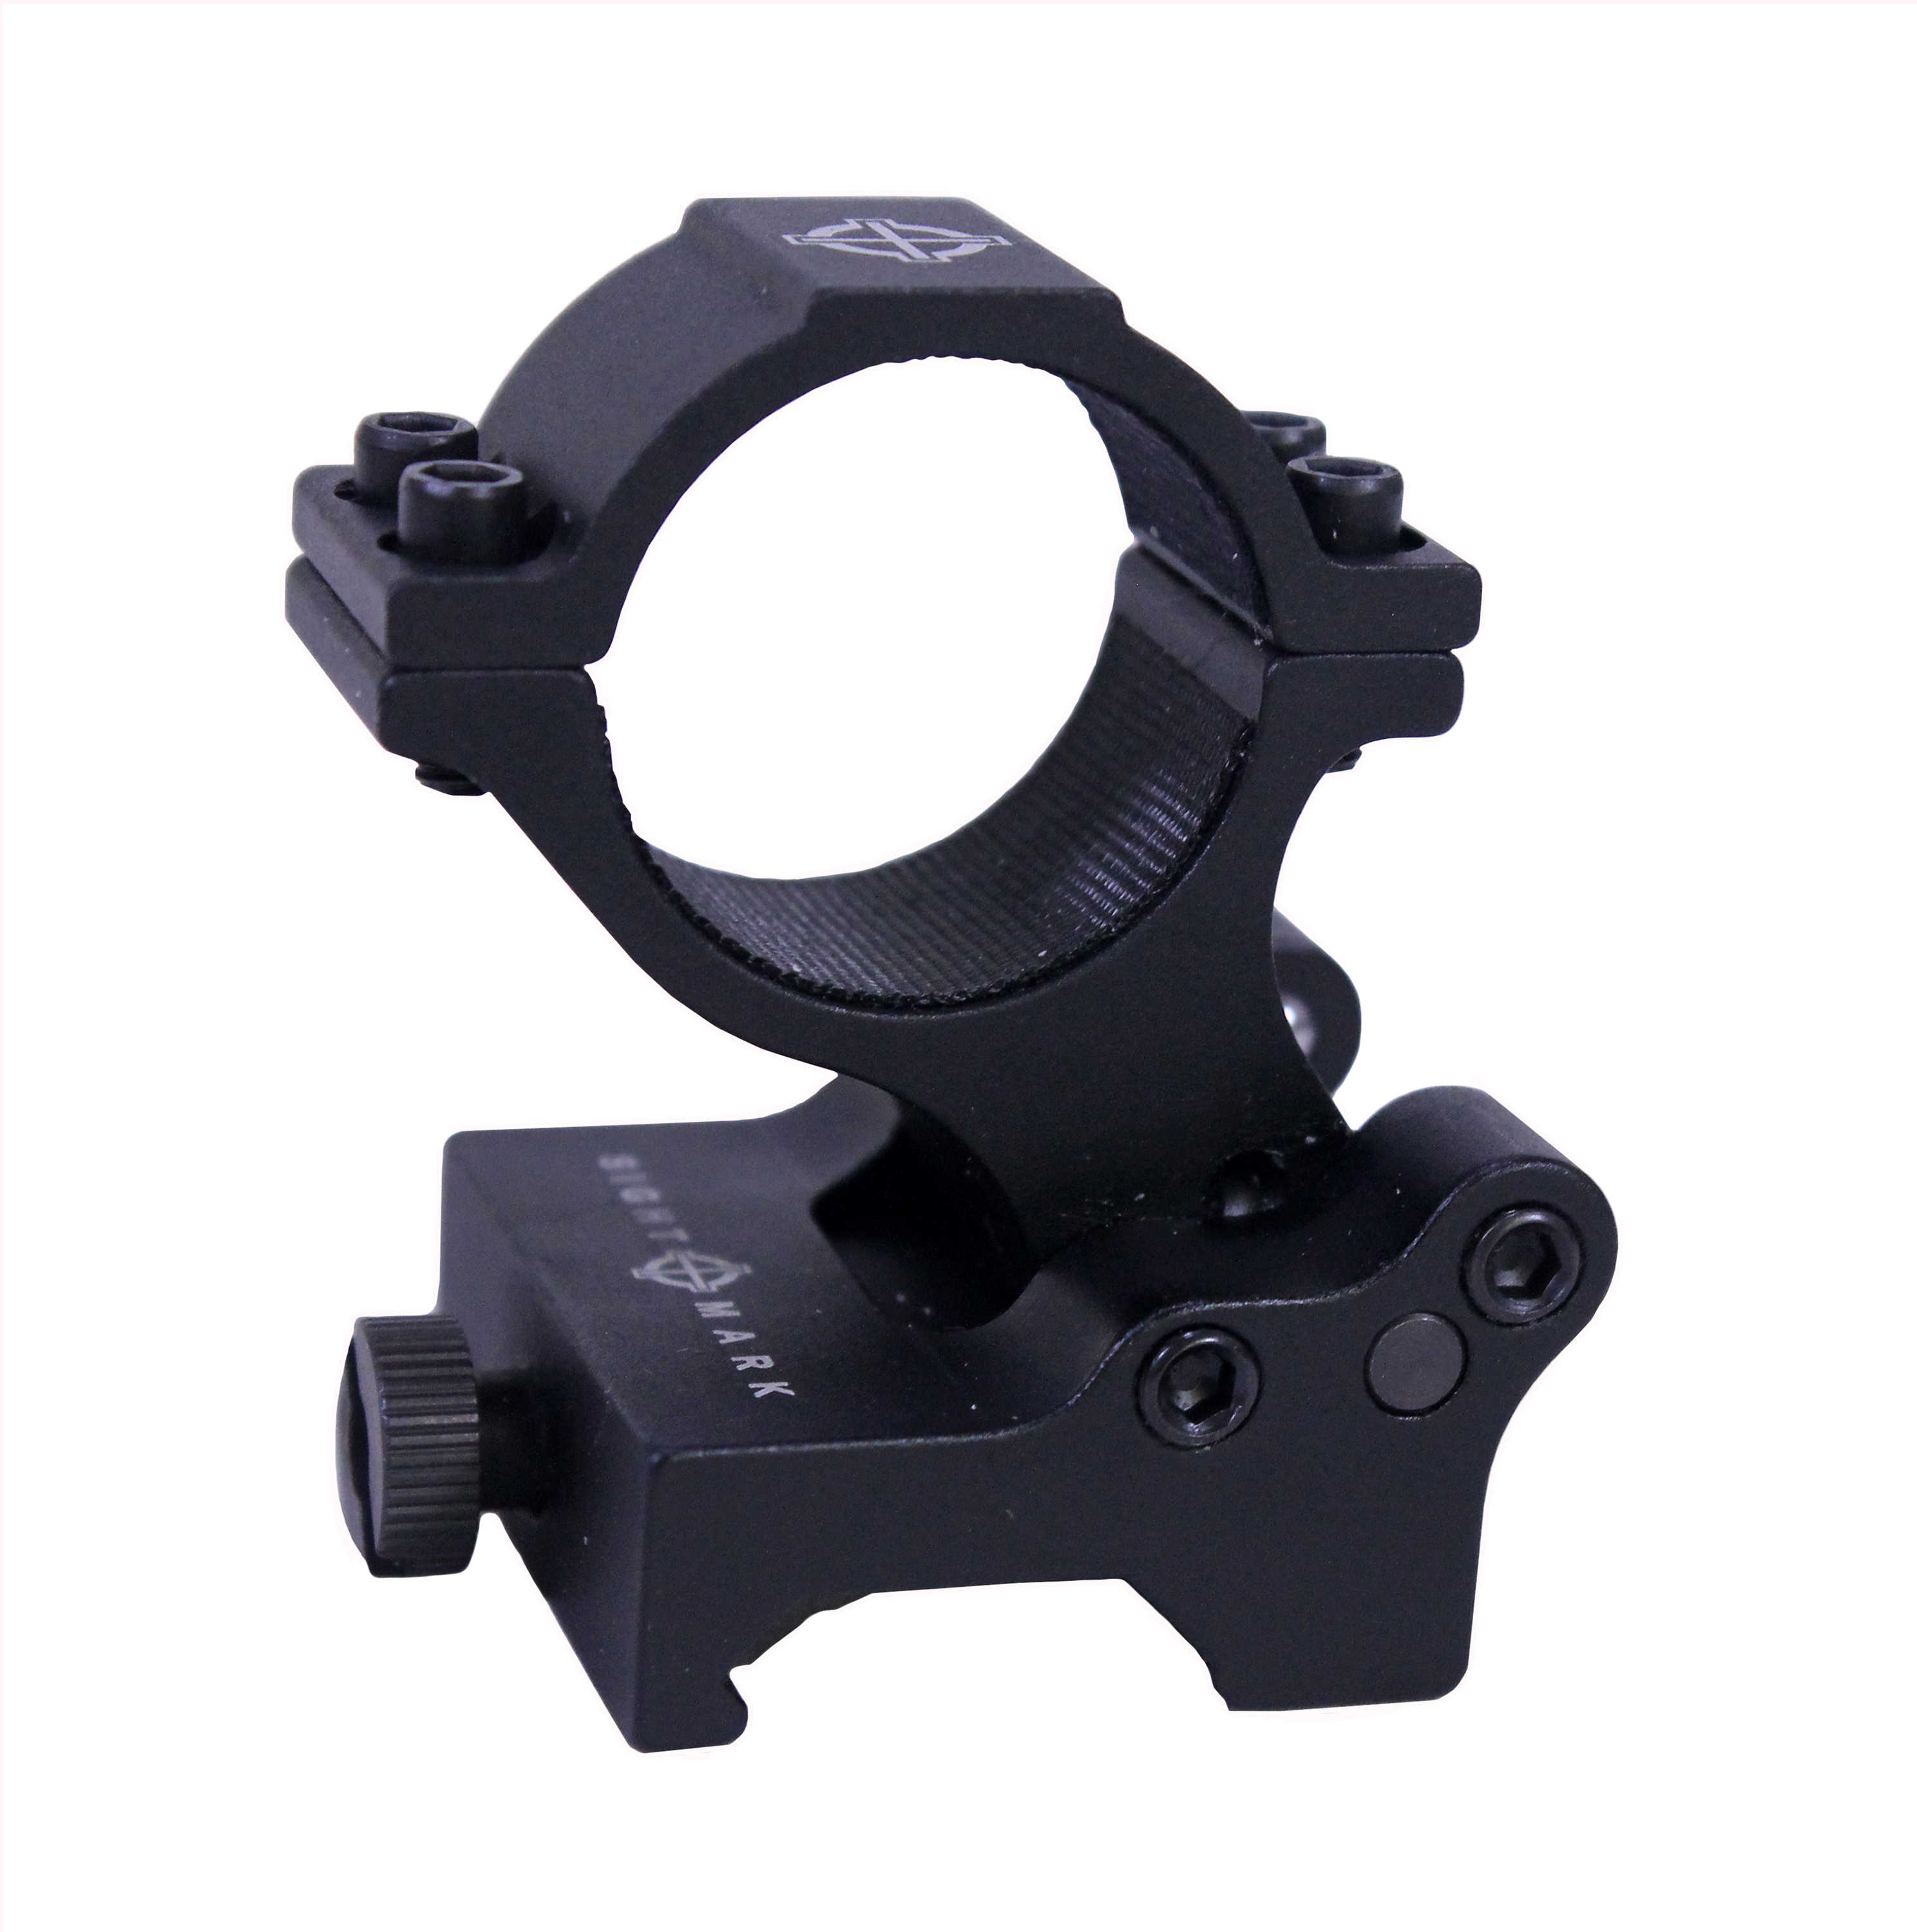 Sightmark Flip To Side Magnifier Mount Fixed Md: Sm34015